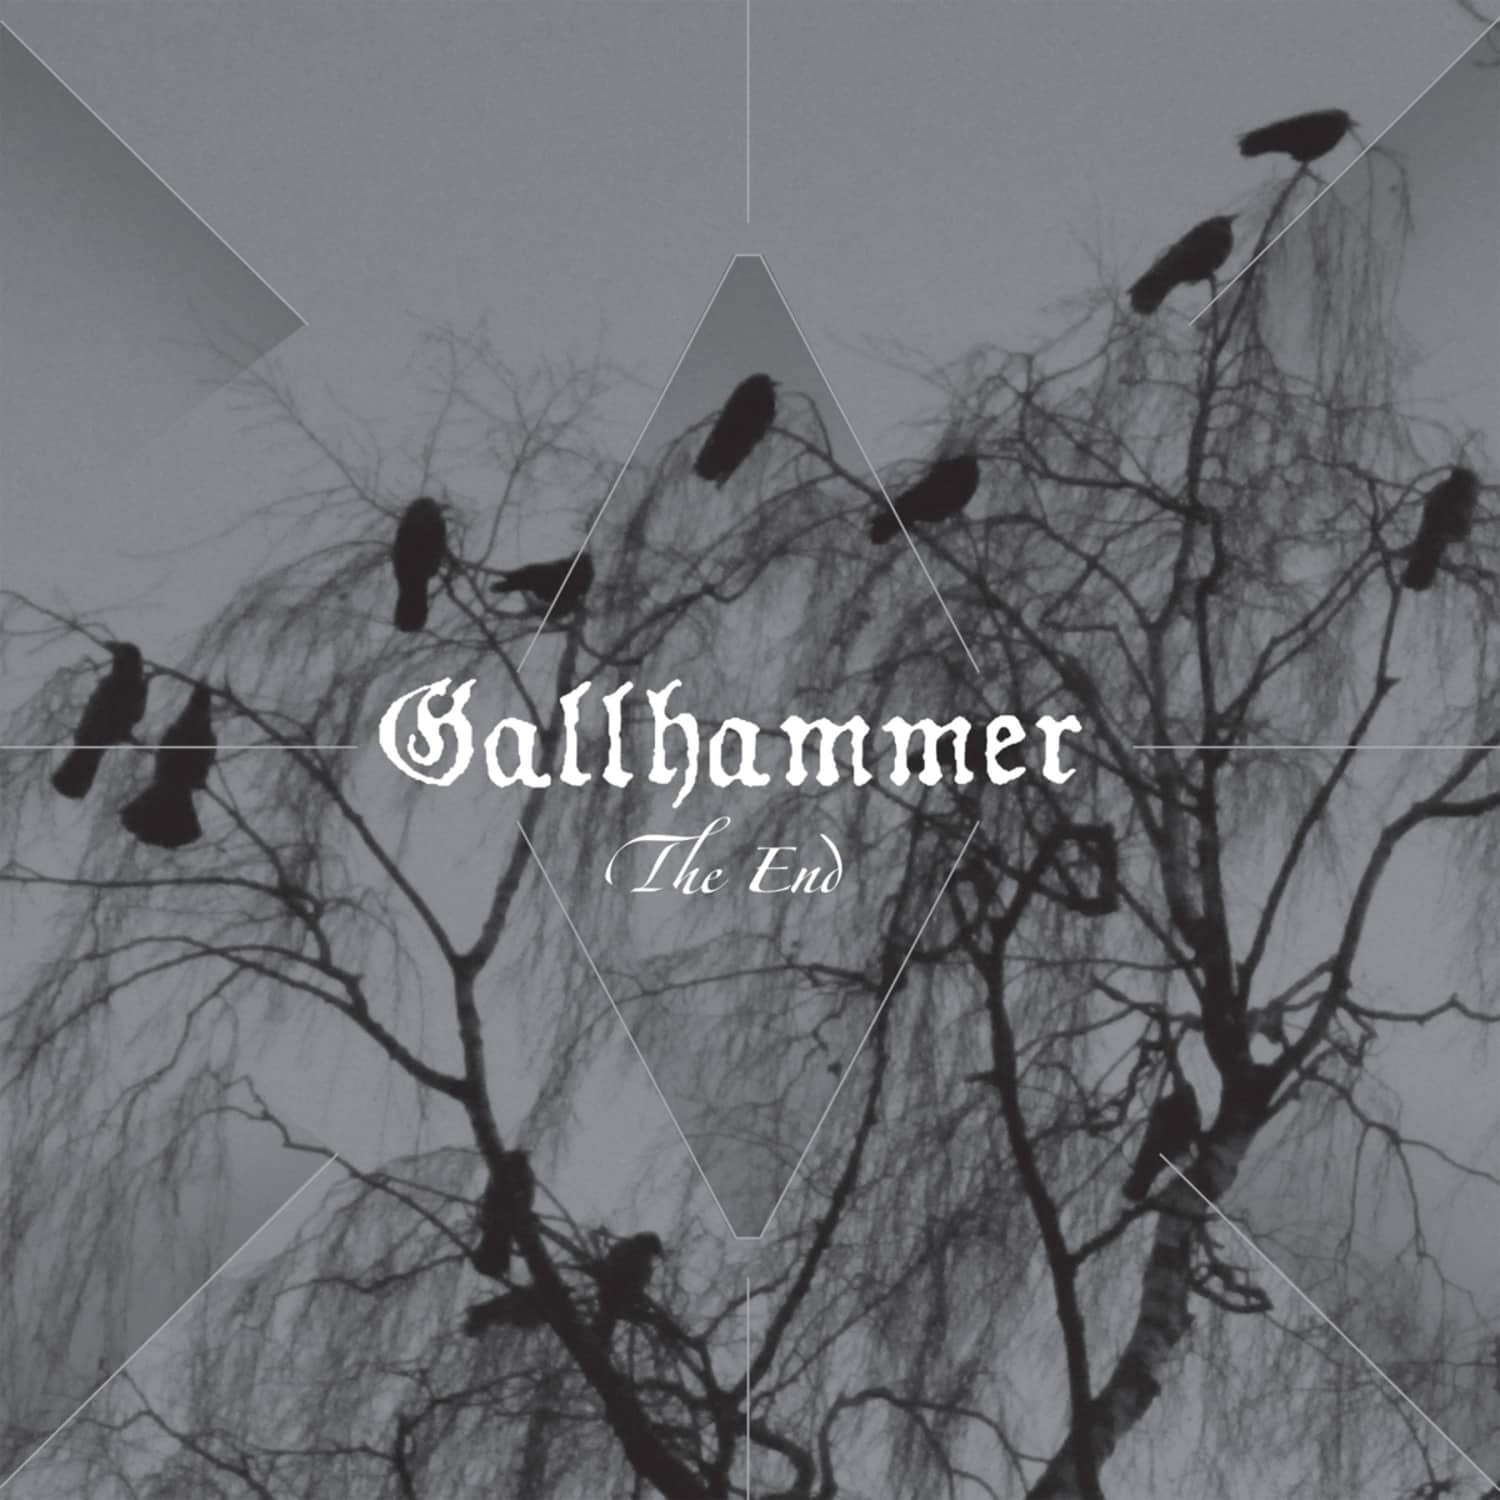 Gallhammer - THE END 